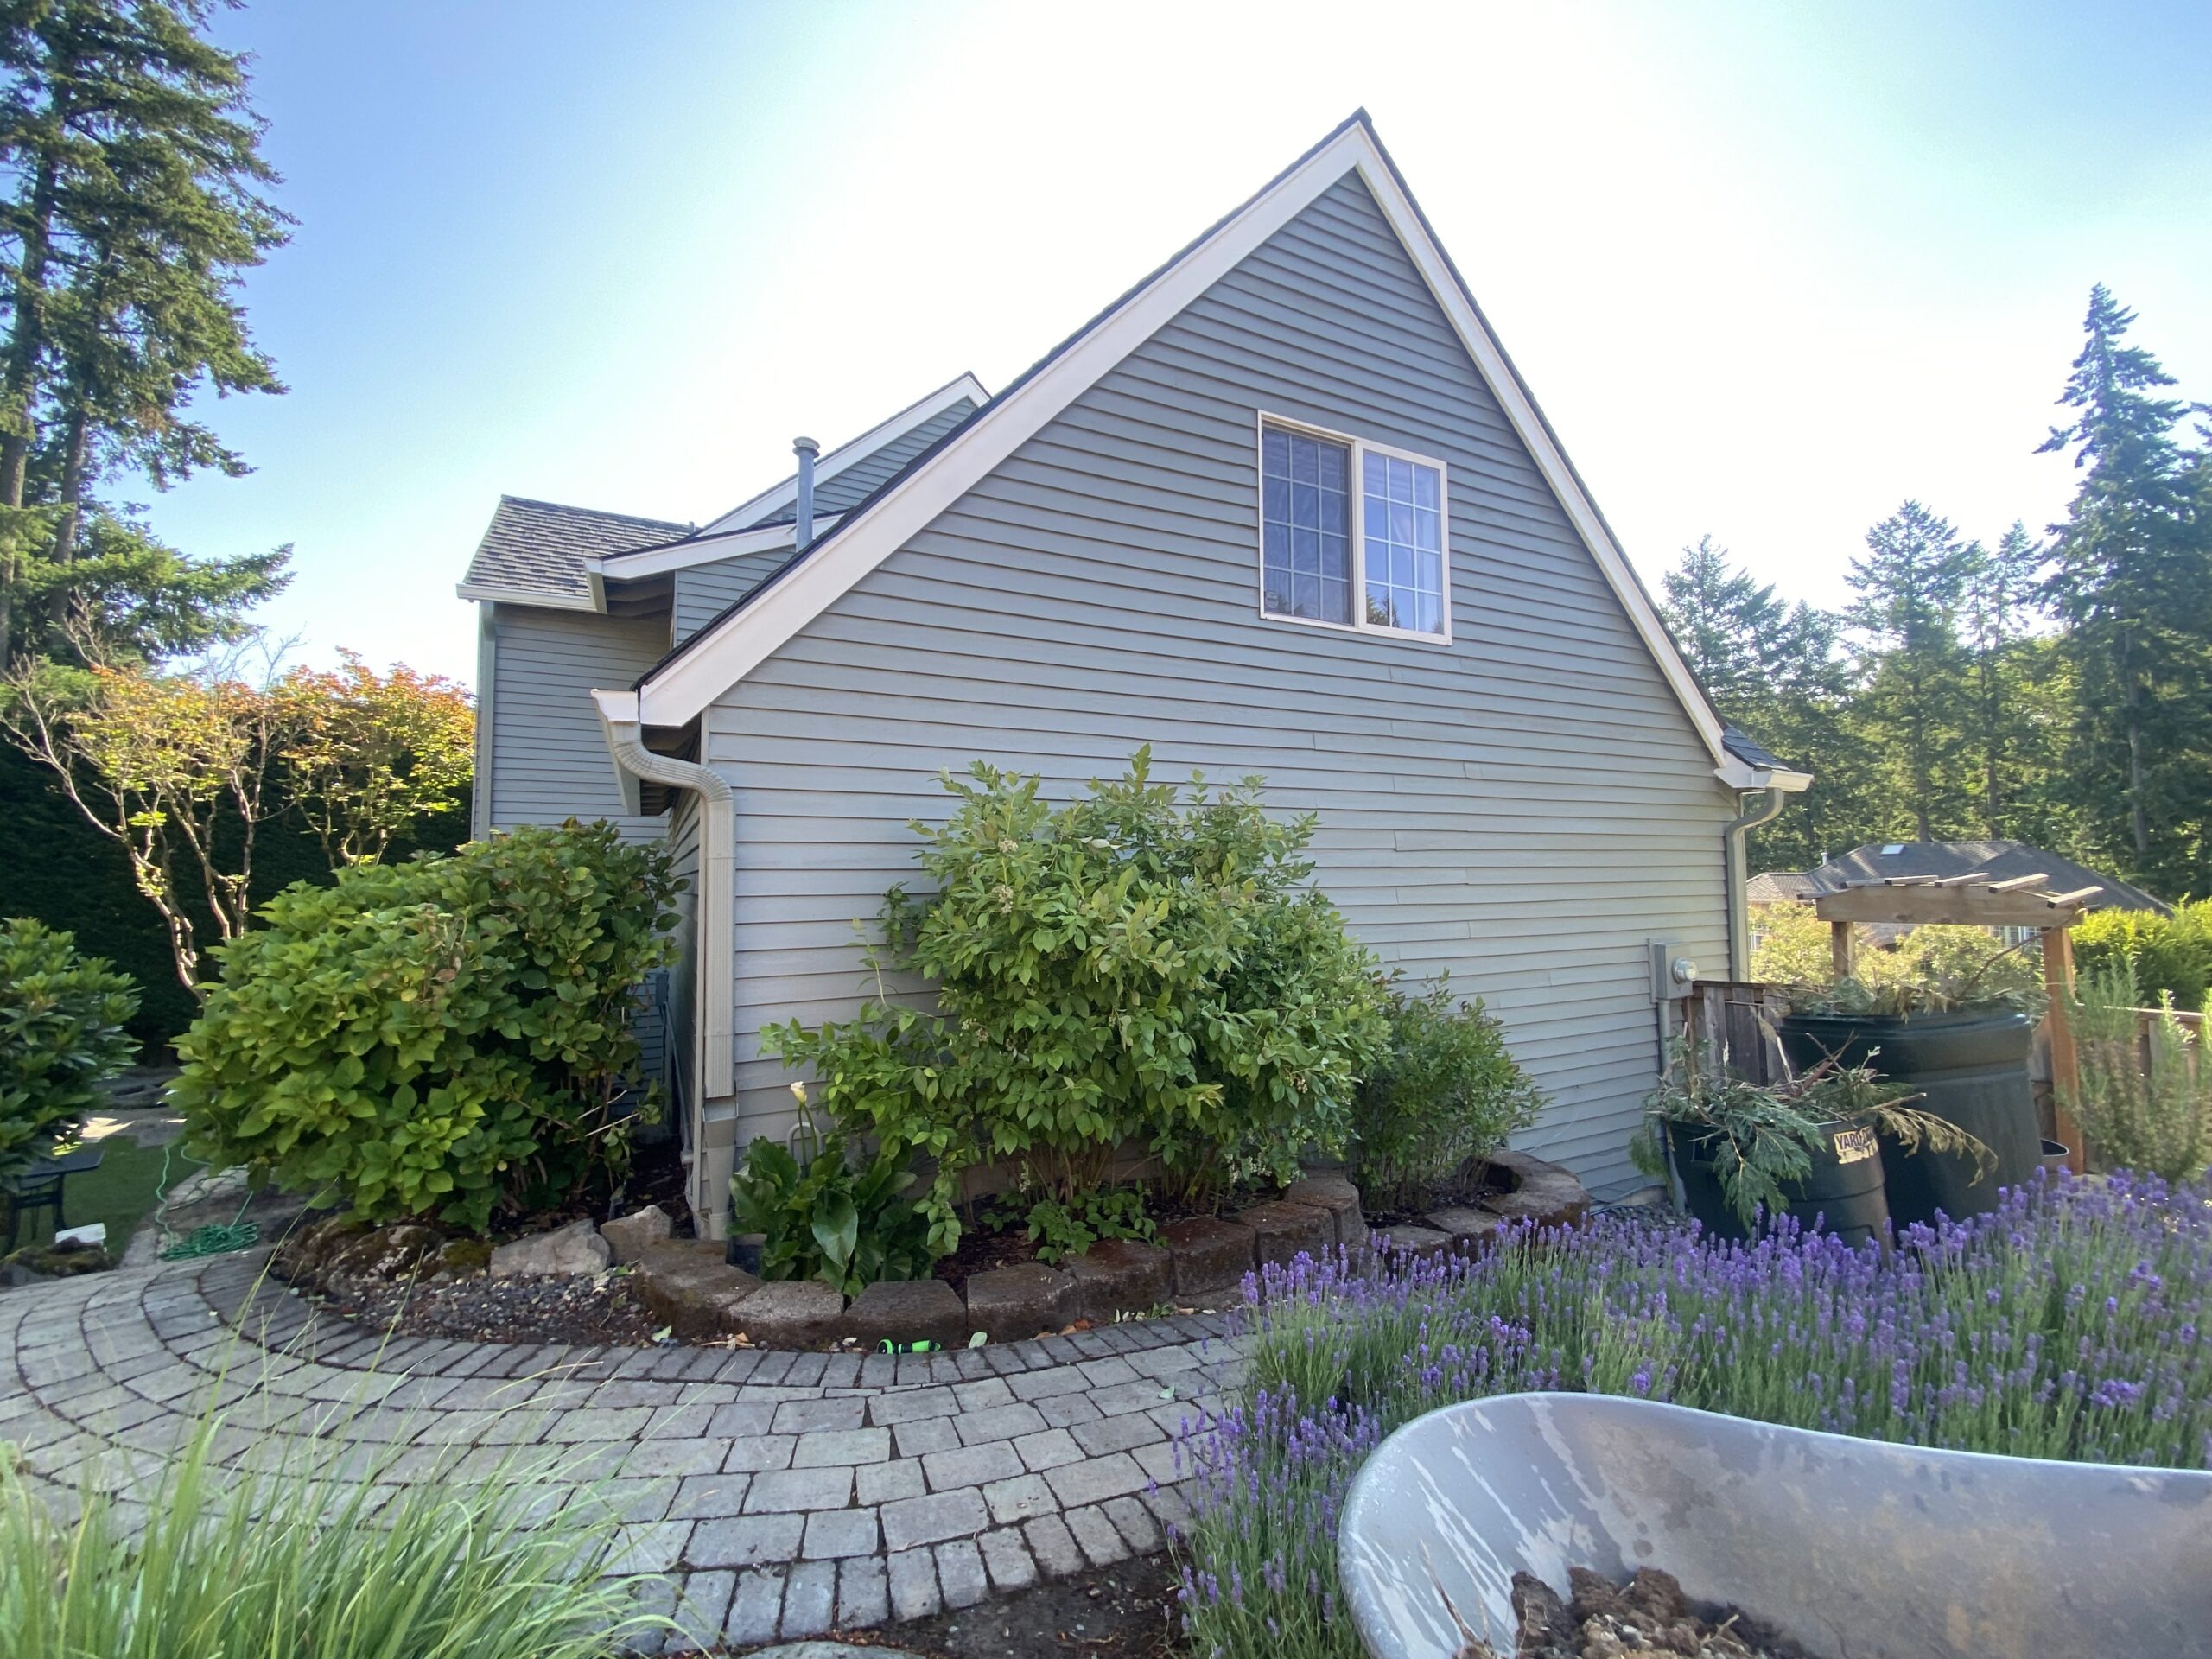 A charming house nestled in the Bull Mountain Neighborhood, featuring a picturesque garden and a convenient wheelbarrow for your next Painting Project.